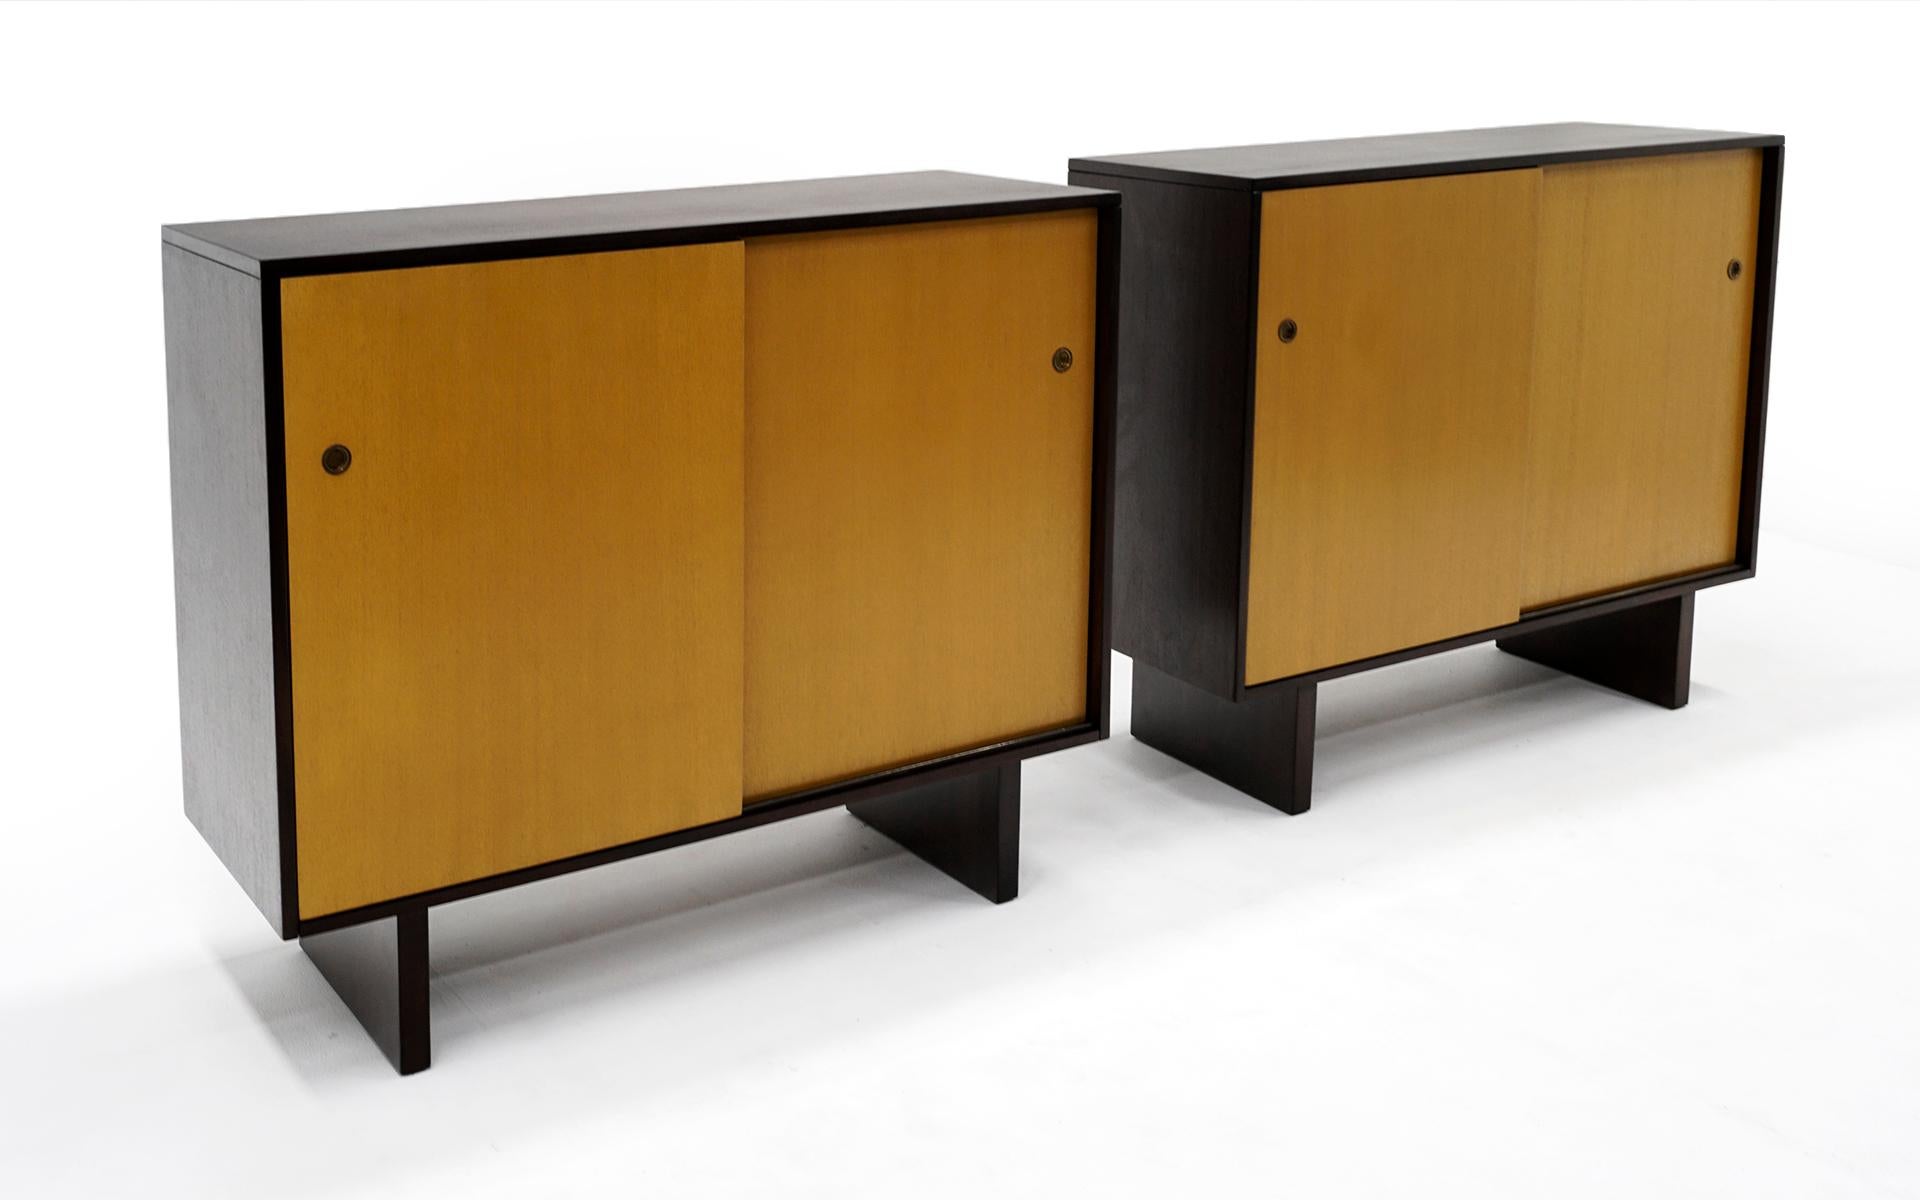 Rare and fine pair of dressers / chests / storage cabinets designed by T.H. Robsjohn-Gibbings for the John Widdicomb Company, 1950s. The mahogany cases have been expertly refinished in the original dark top and sides, bleached fronts with brass